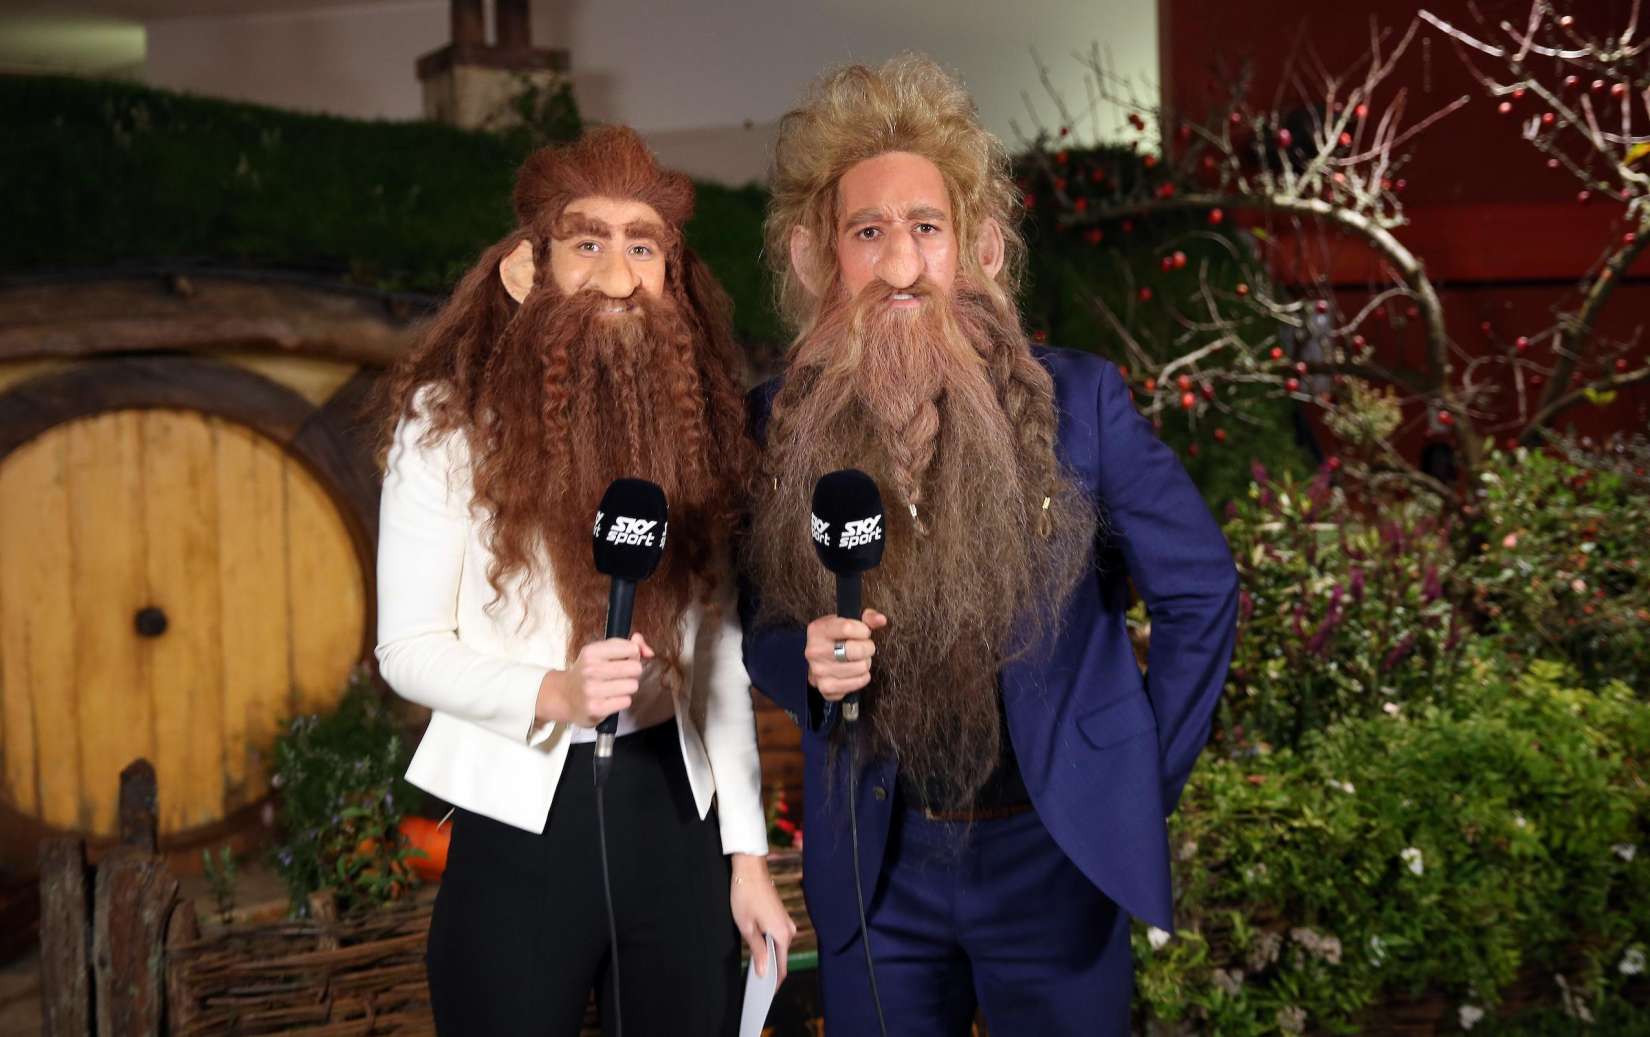 GAME ON: Netball commentators Courtney Tairi and Jordan Vandermade get into the spirit of things dressed as dwarves at the inaugural Hobbiton Movie Set Cup Photo Michael Bradley Photography